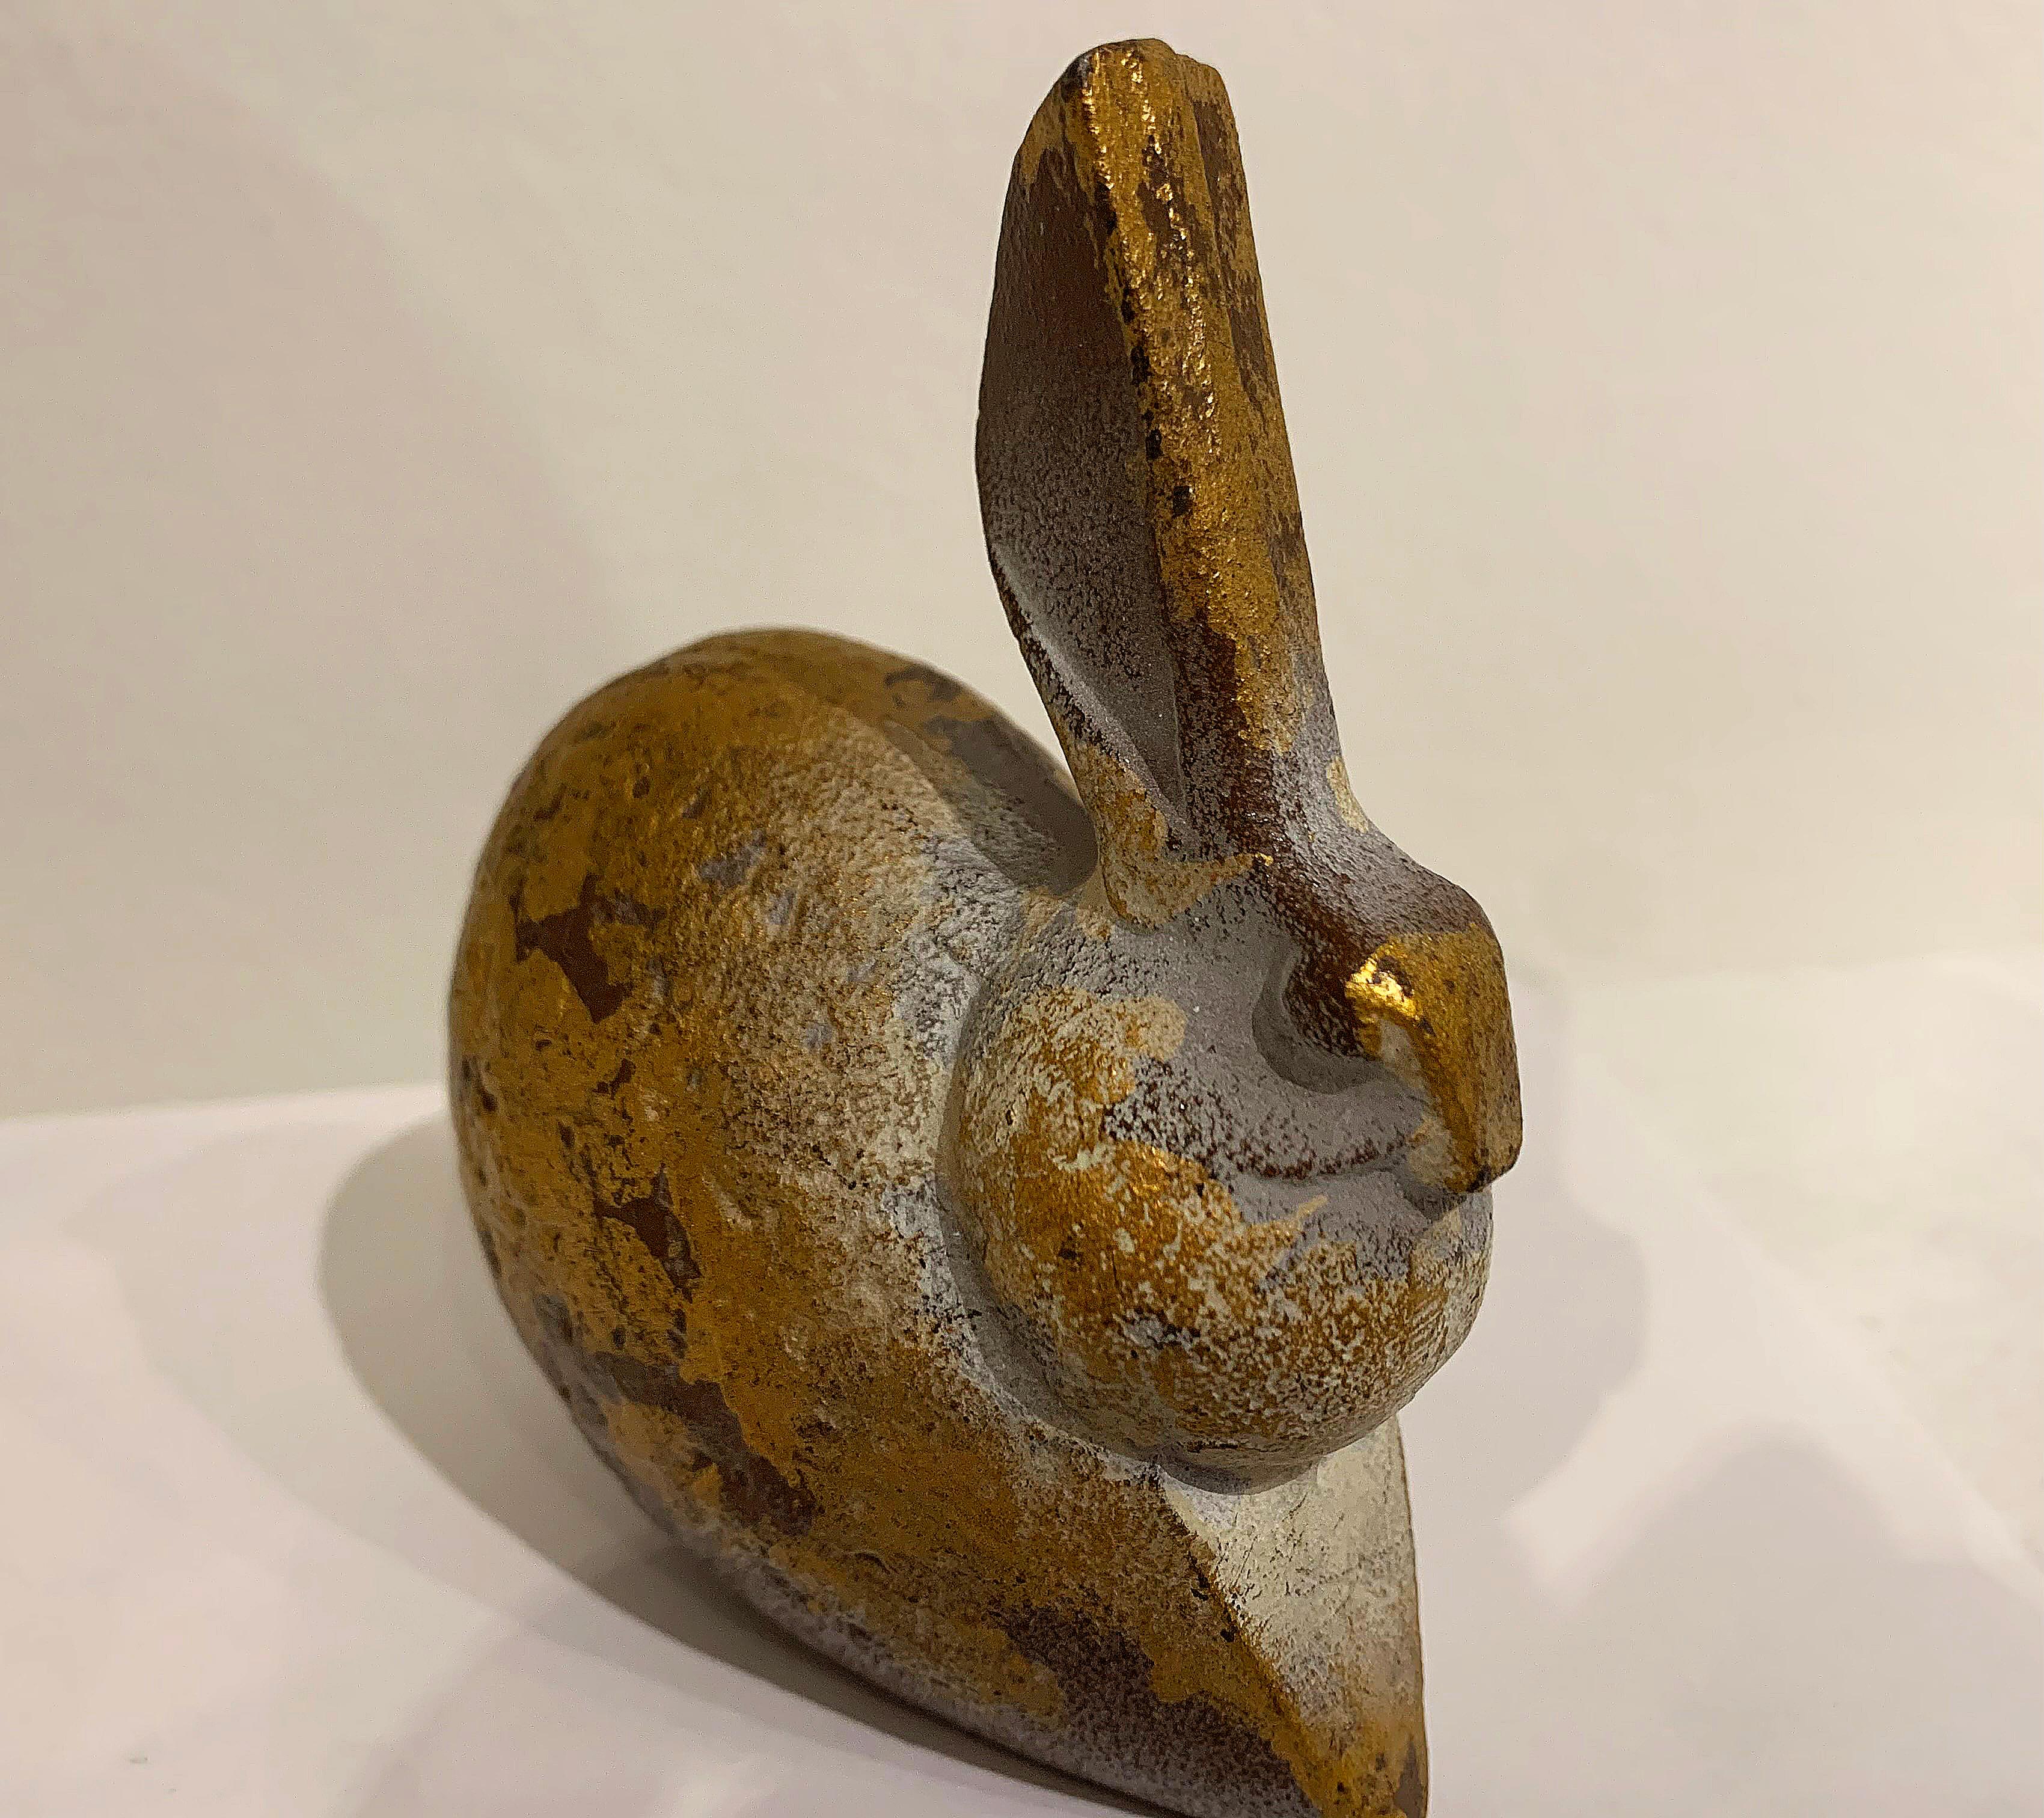 Hare, rabbit small sculpture or paperweight, gold paint, terracotta color finish - Contemporary Art by Unknown